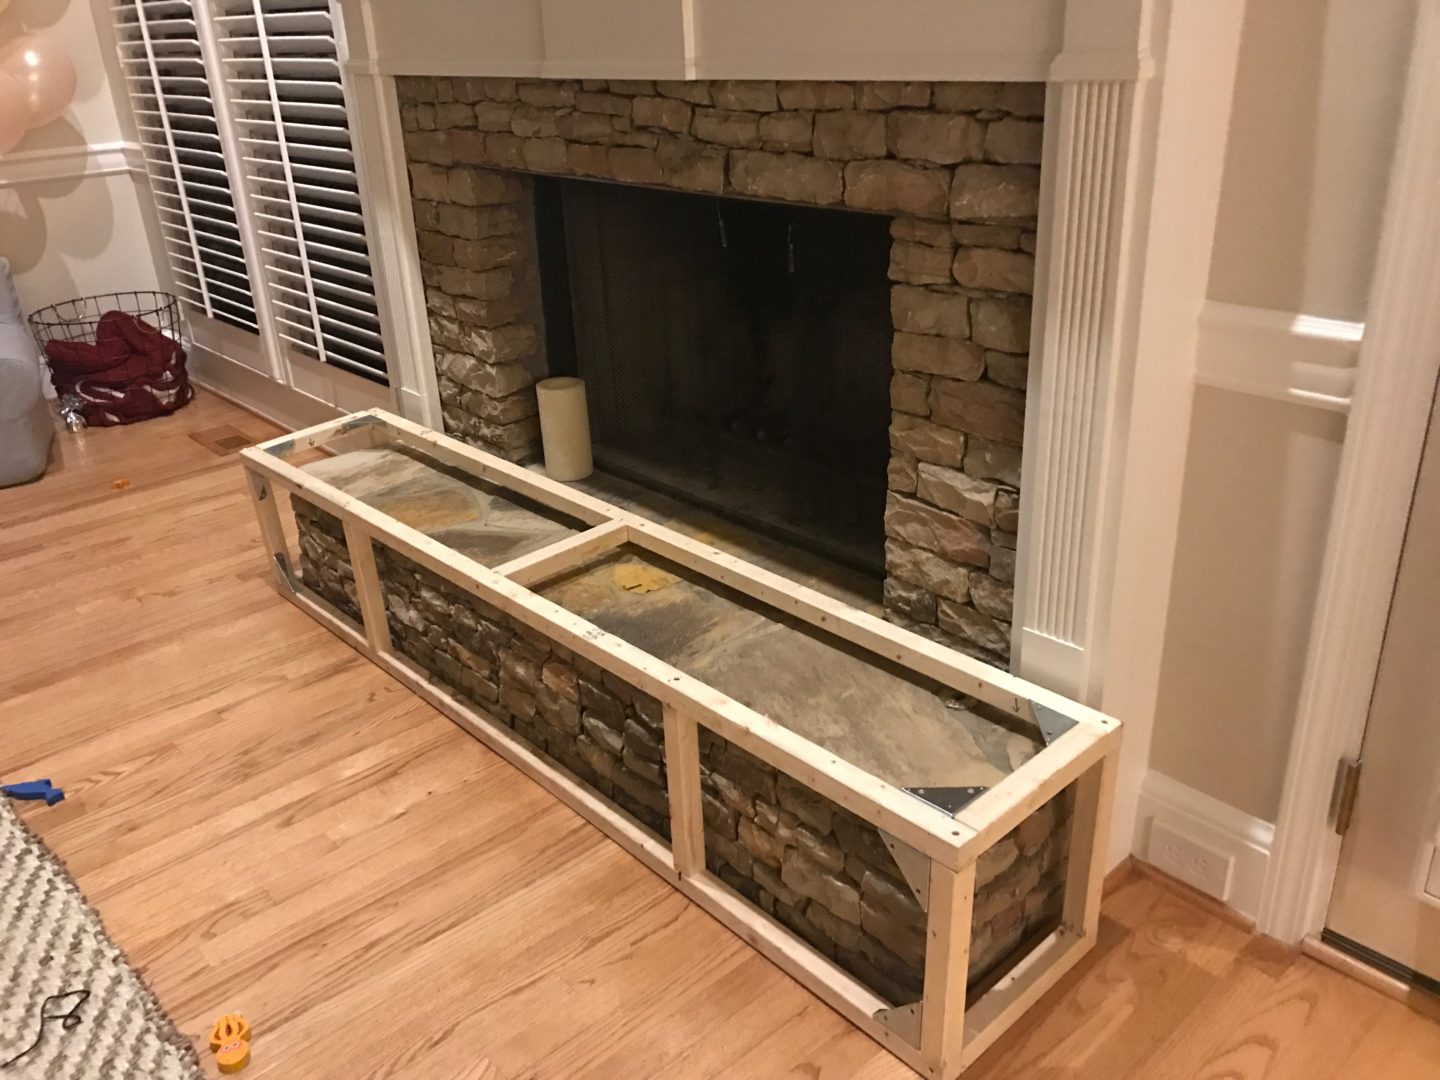 IMG_3021-1440x1080 How To Baby Proof Your Fireplace | Nightmare Hearths